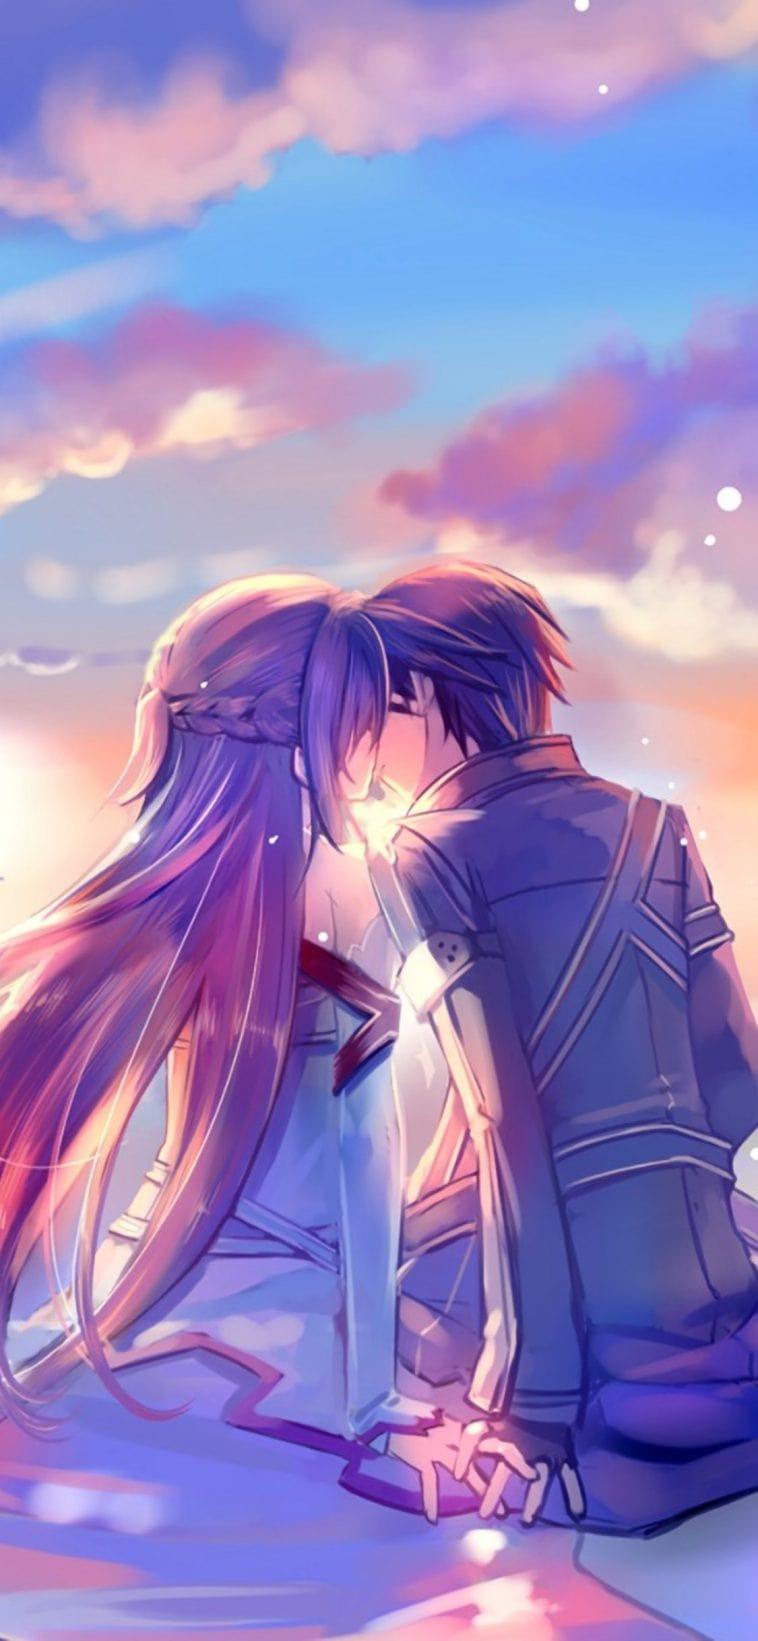 Iphone 11 Wallpapers Anime Couple 4k Hd Download Free